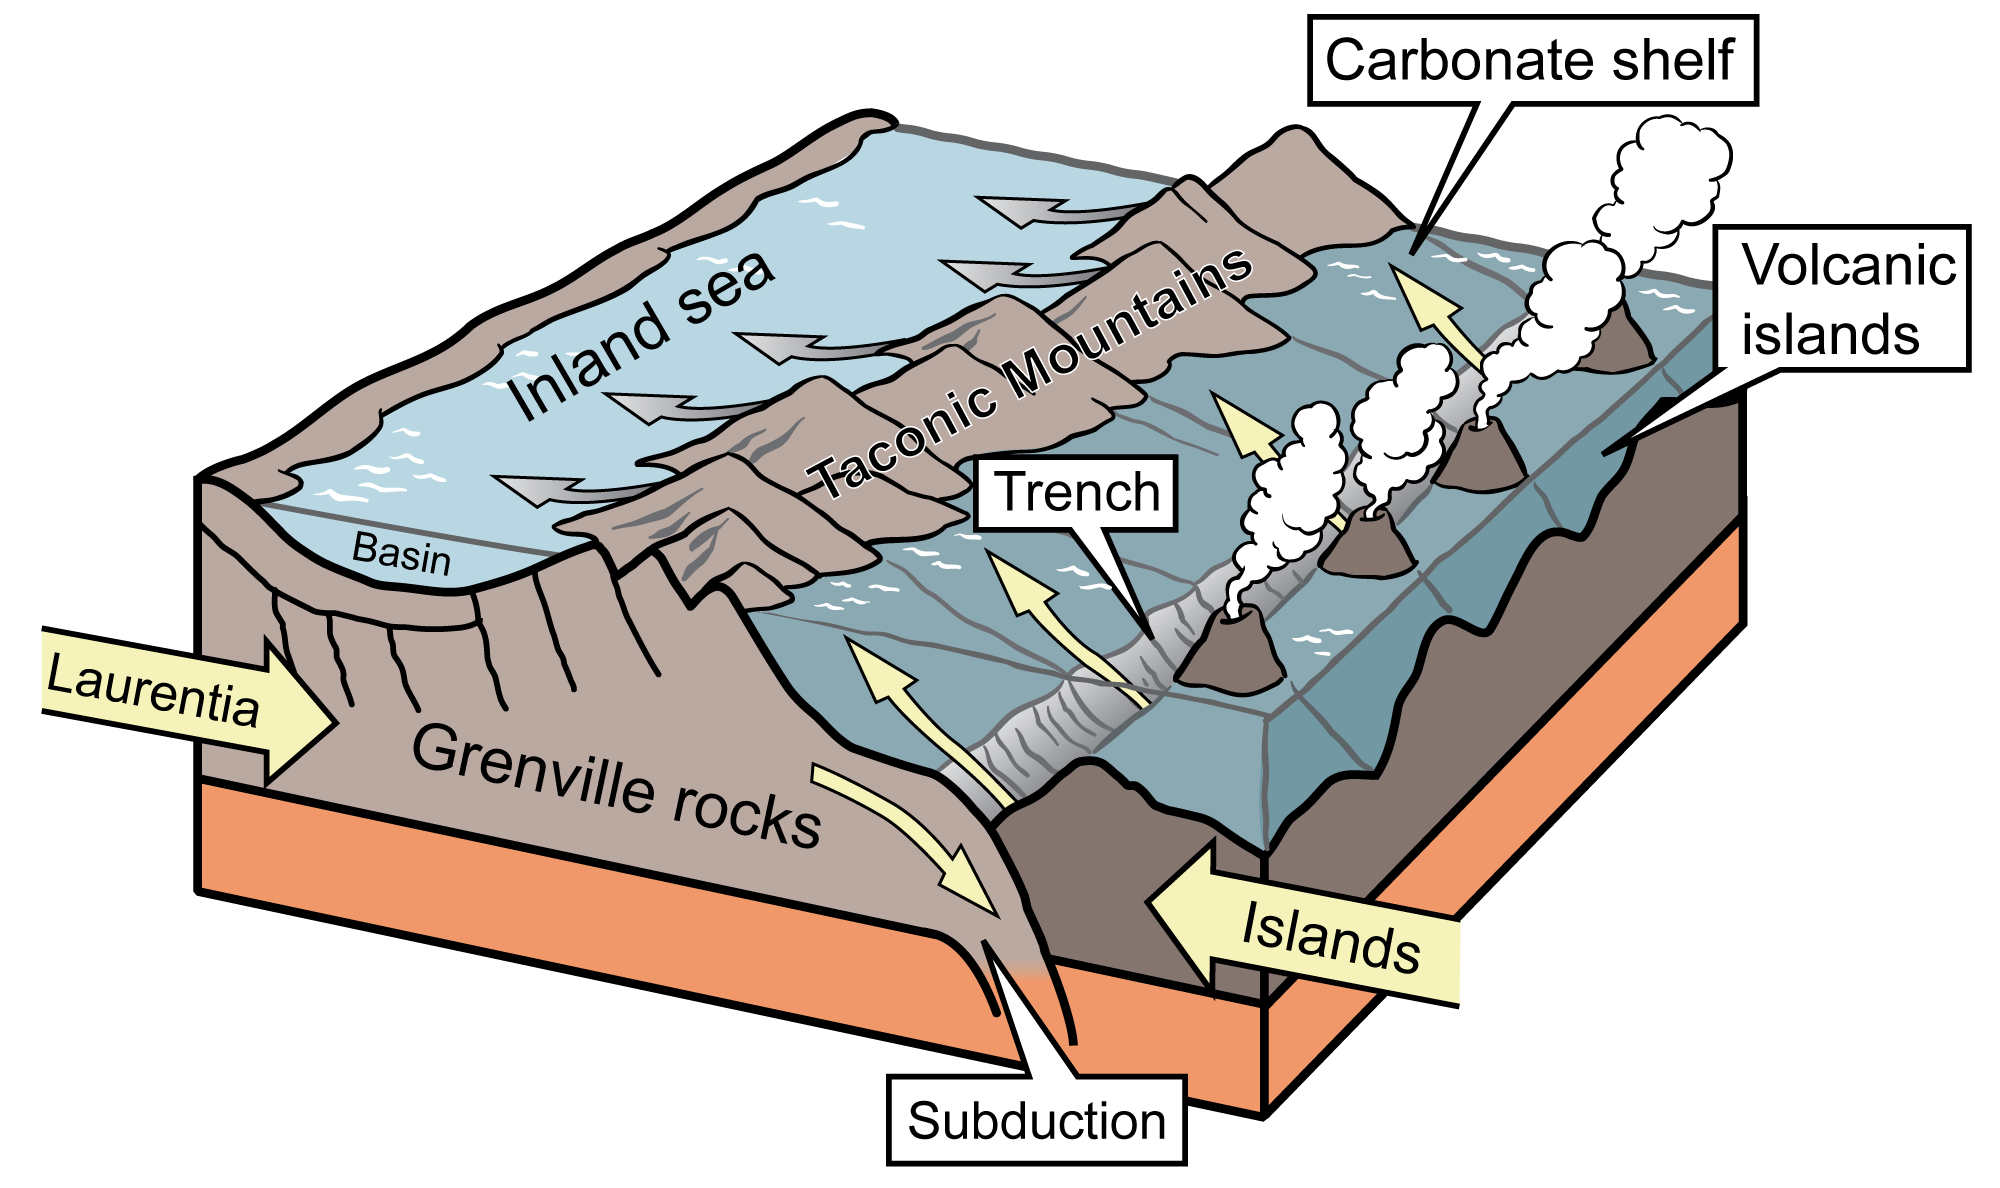 Illustration of volcanic islands forming as the Iapetus Ocean closed during the Taconic Orogeny.